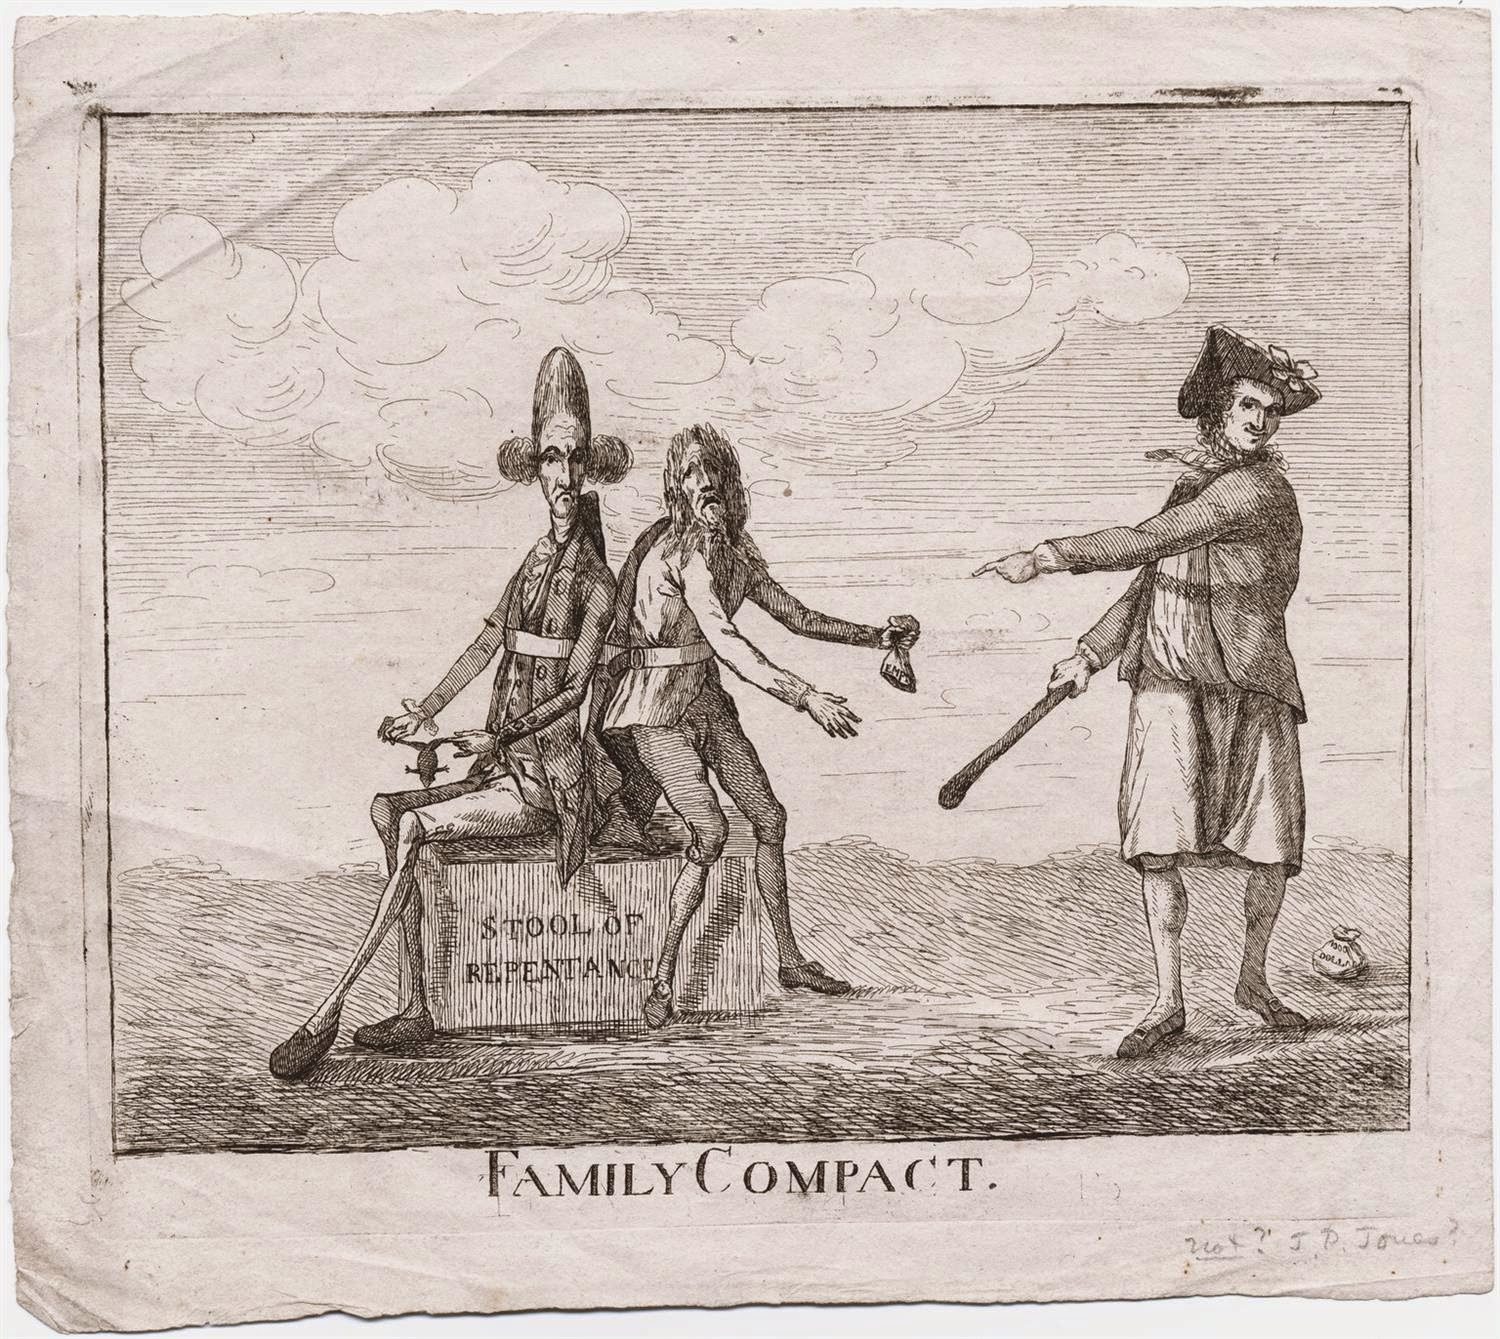 Family Compact, 1778